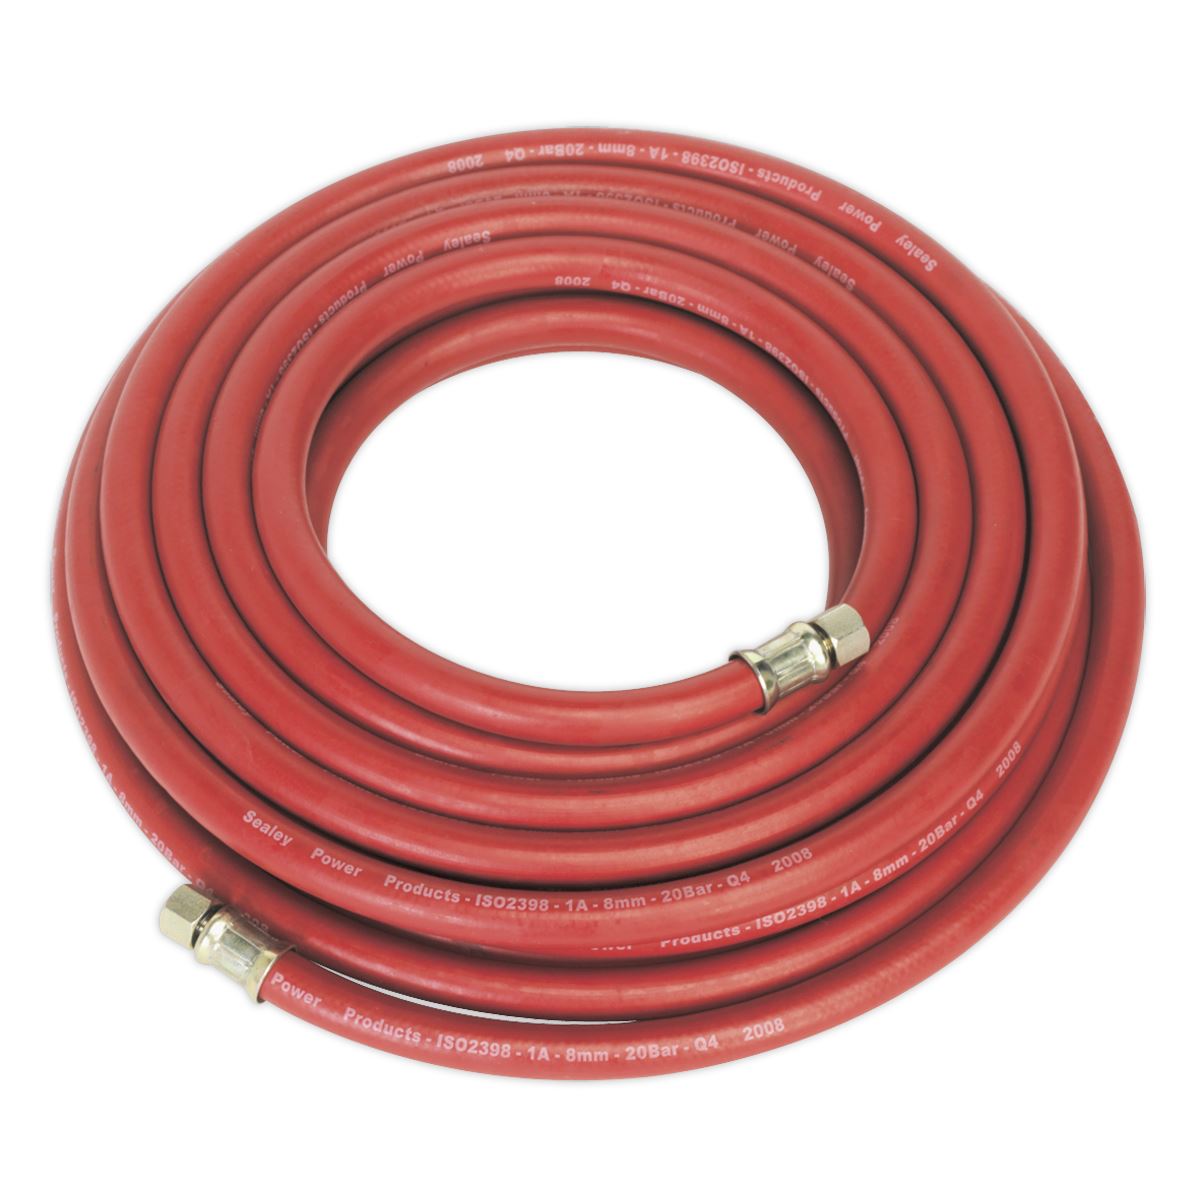 Sealey Air Hose 10m x Ø8mm with 1/4"BSP Unions